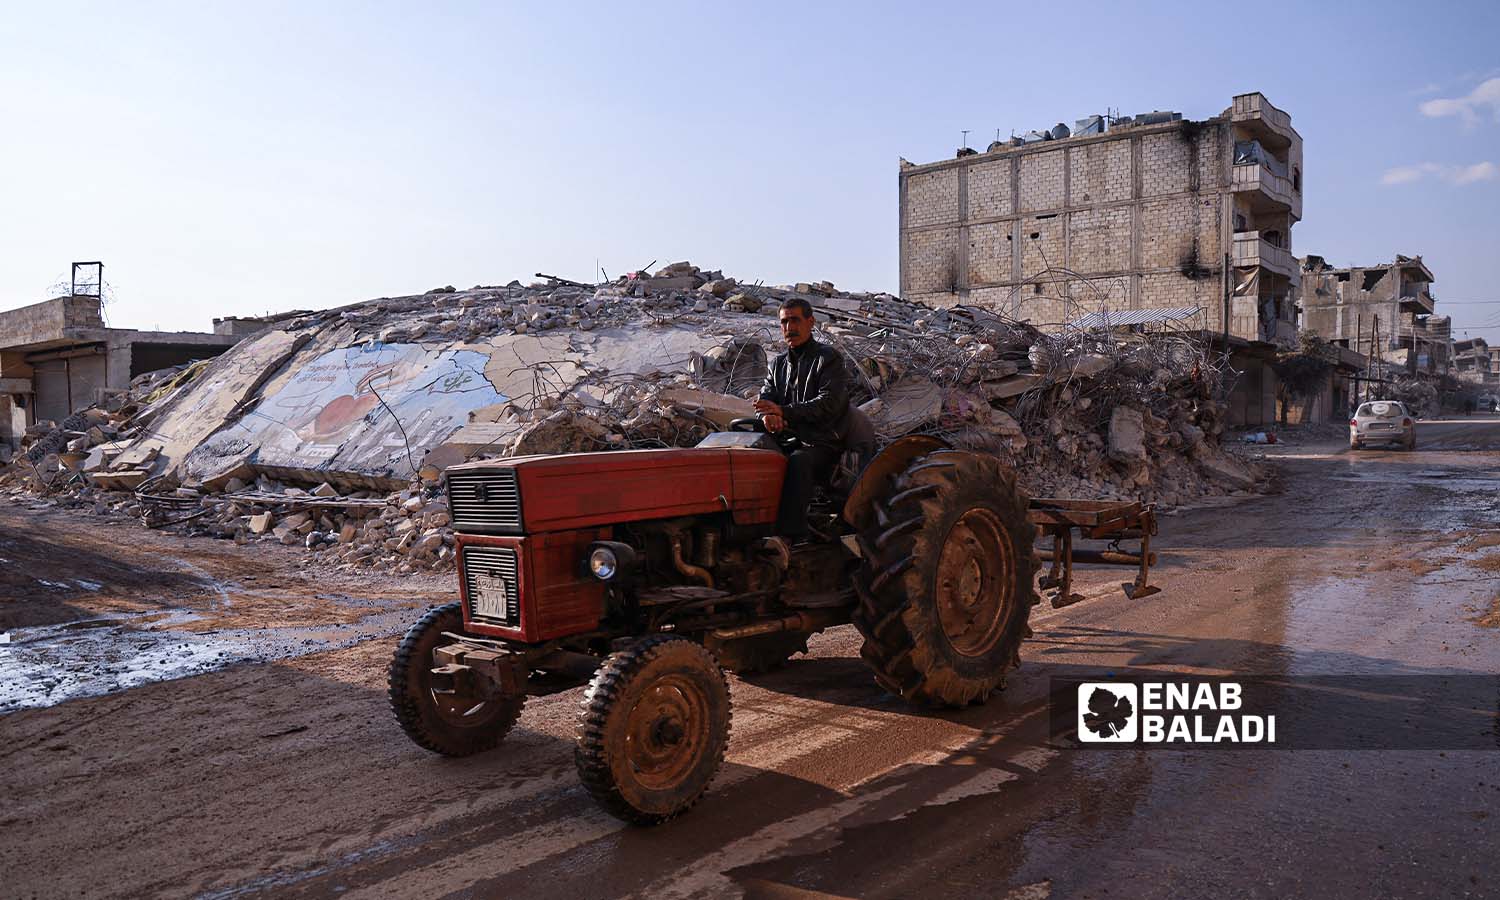 Debris of destroyed houses in the streets of Jindires town in Aleppo countryside, following the earthquake that hit northwestern Syria - February 24, 2023 (Enab Baladi/Amir Kharboutli)
